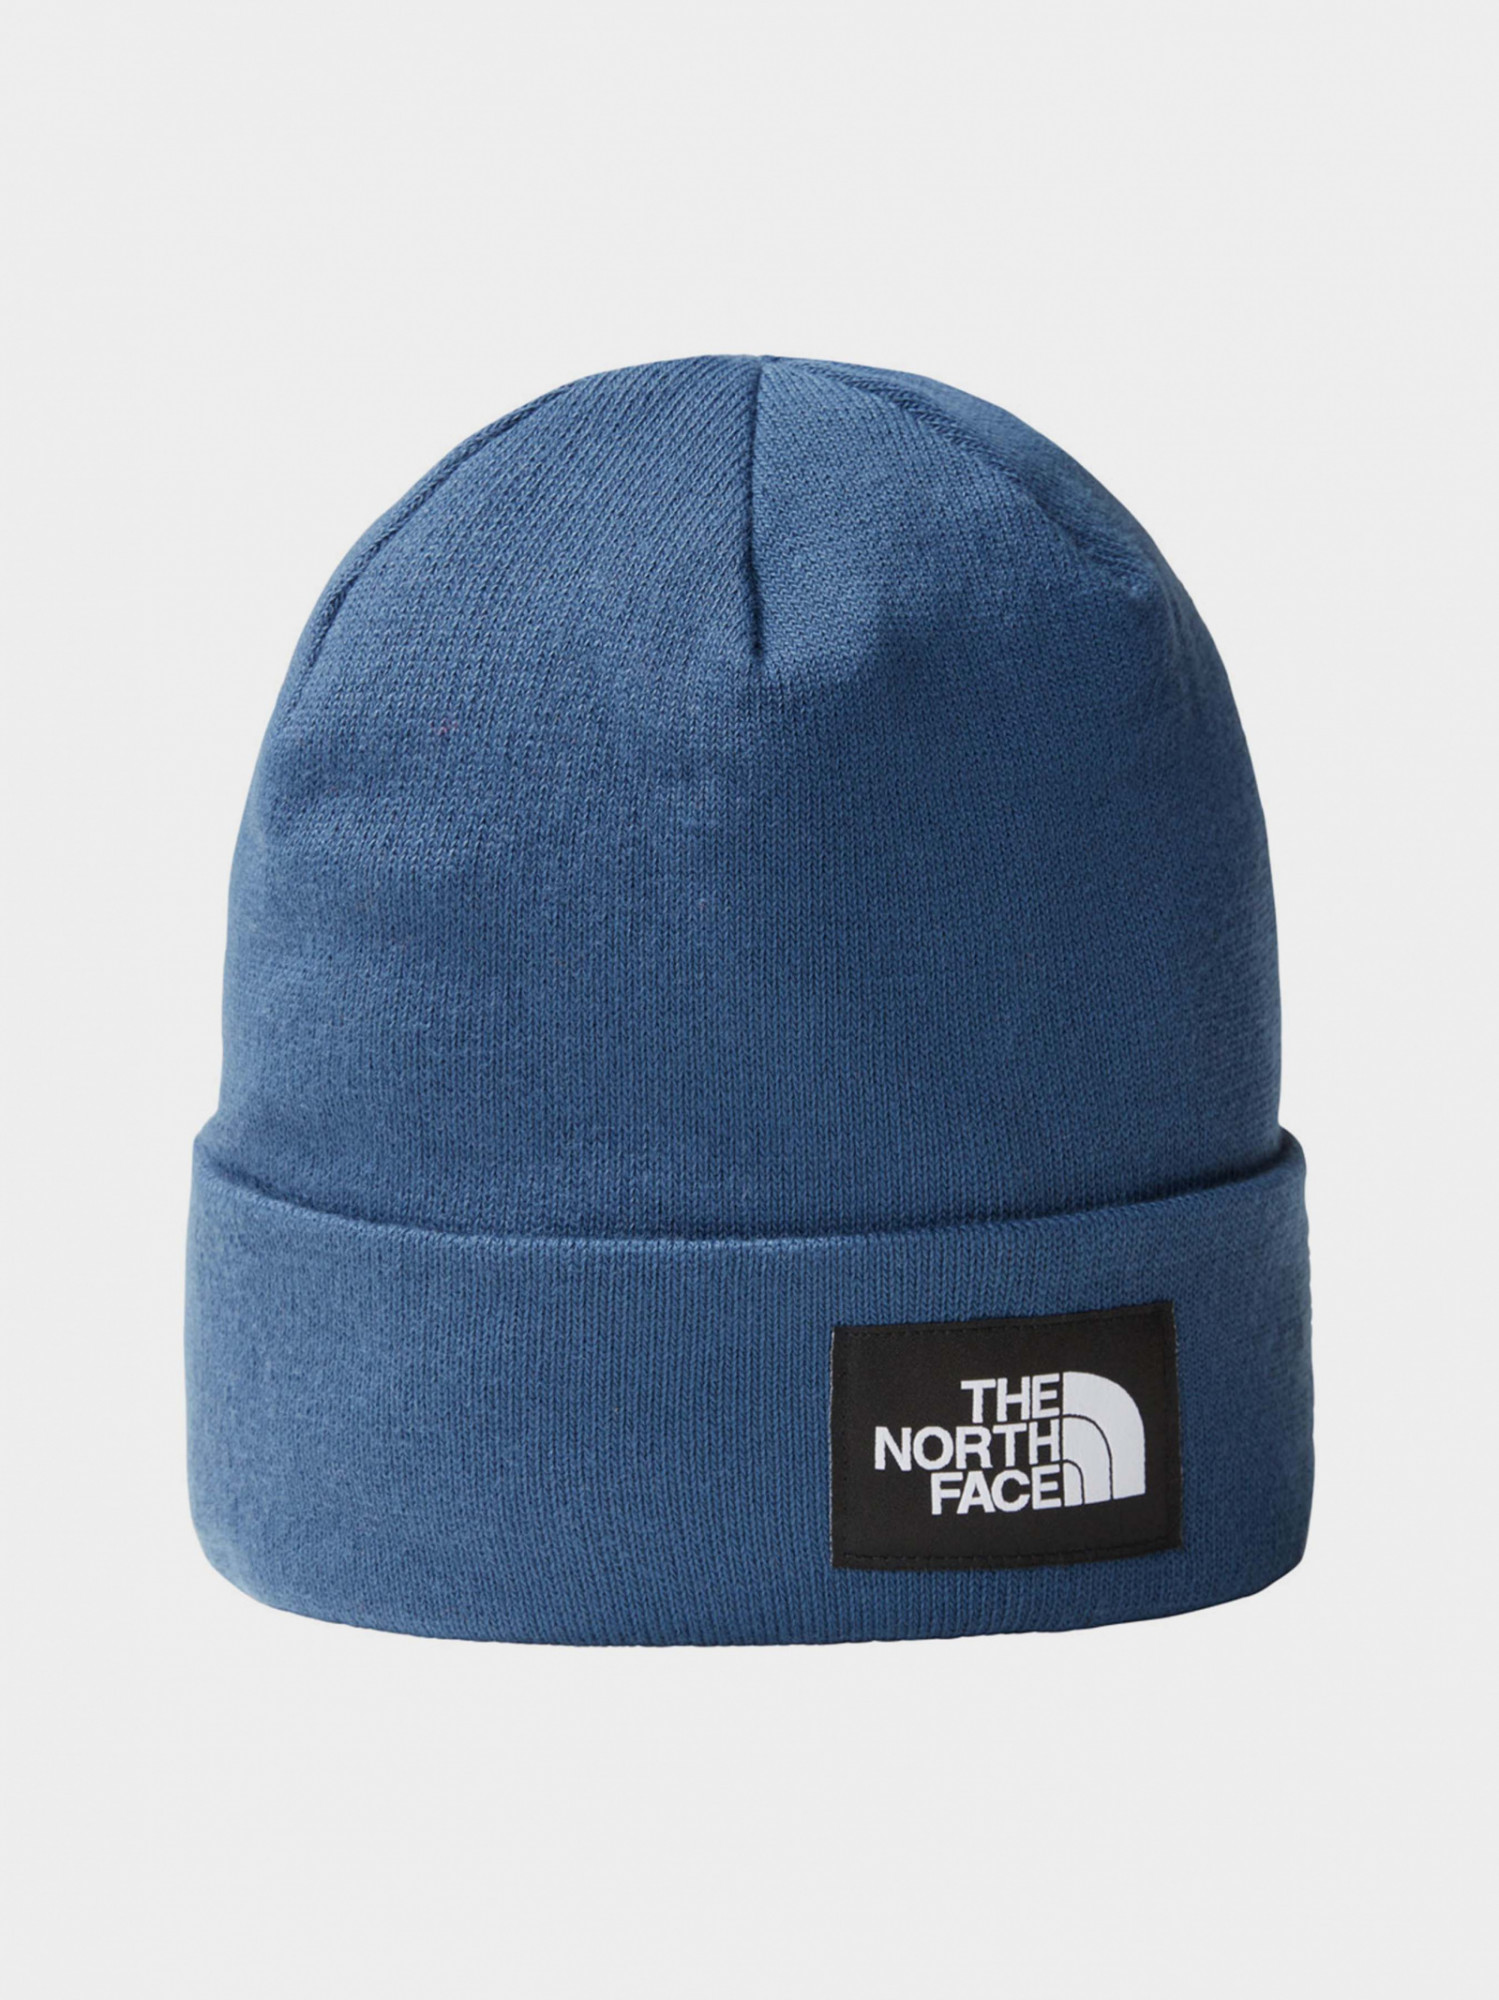 Шапка  The North Face DOCK WORKER RECYCLED BEANIE синяя NF0A3FNTHDC1 изображение 2